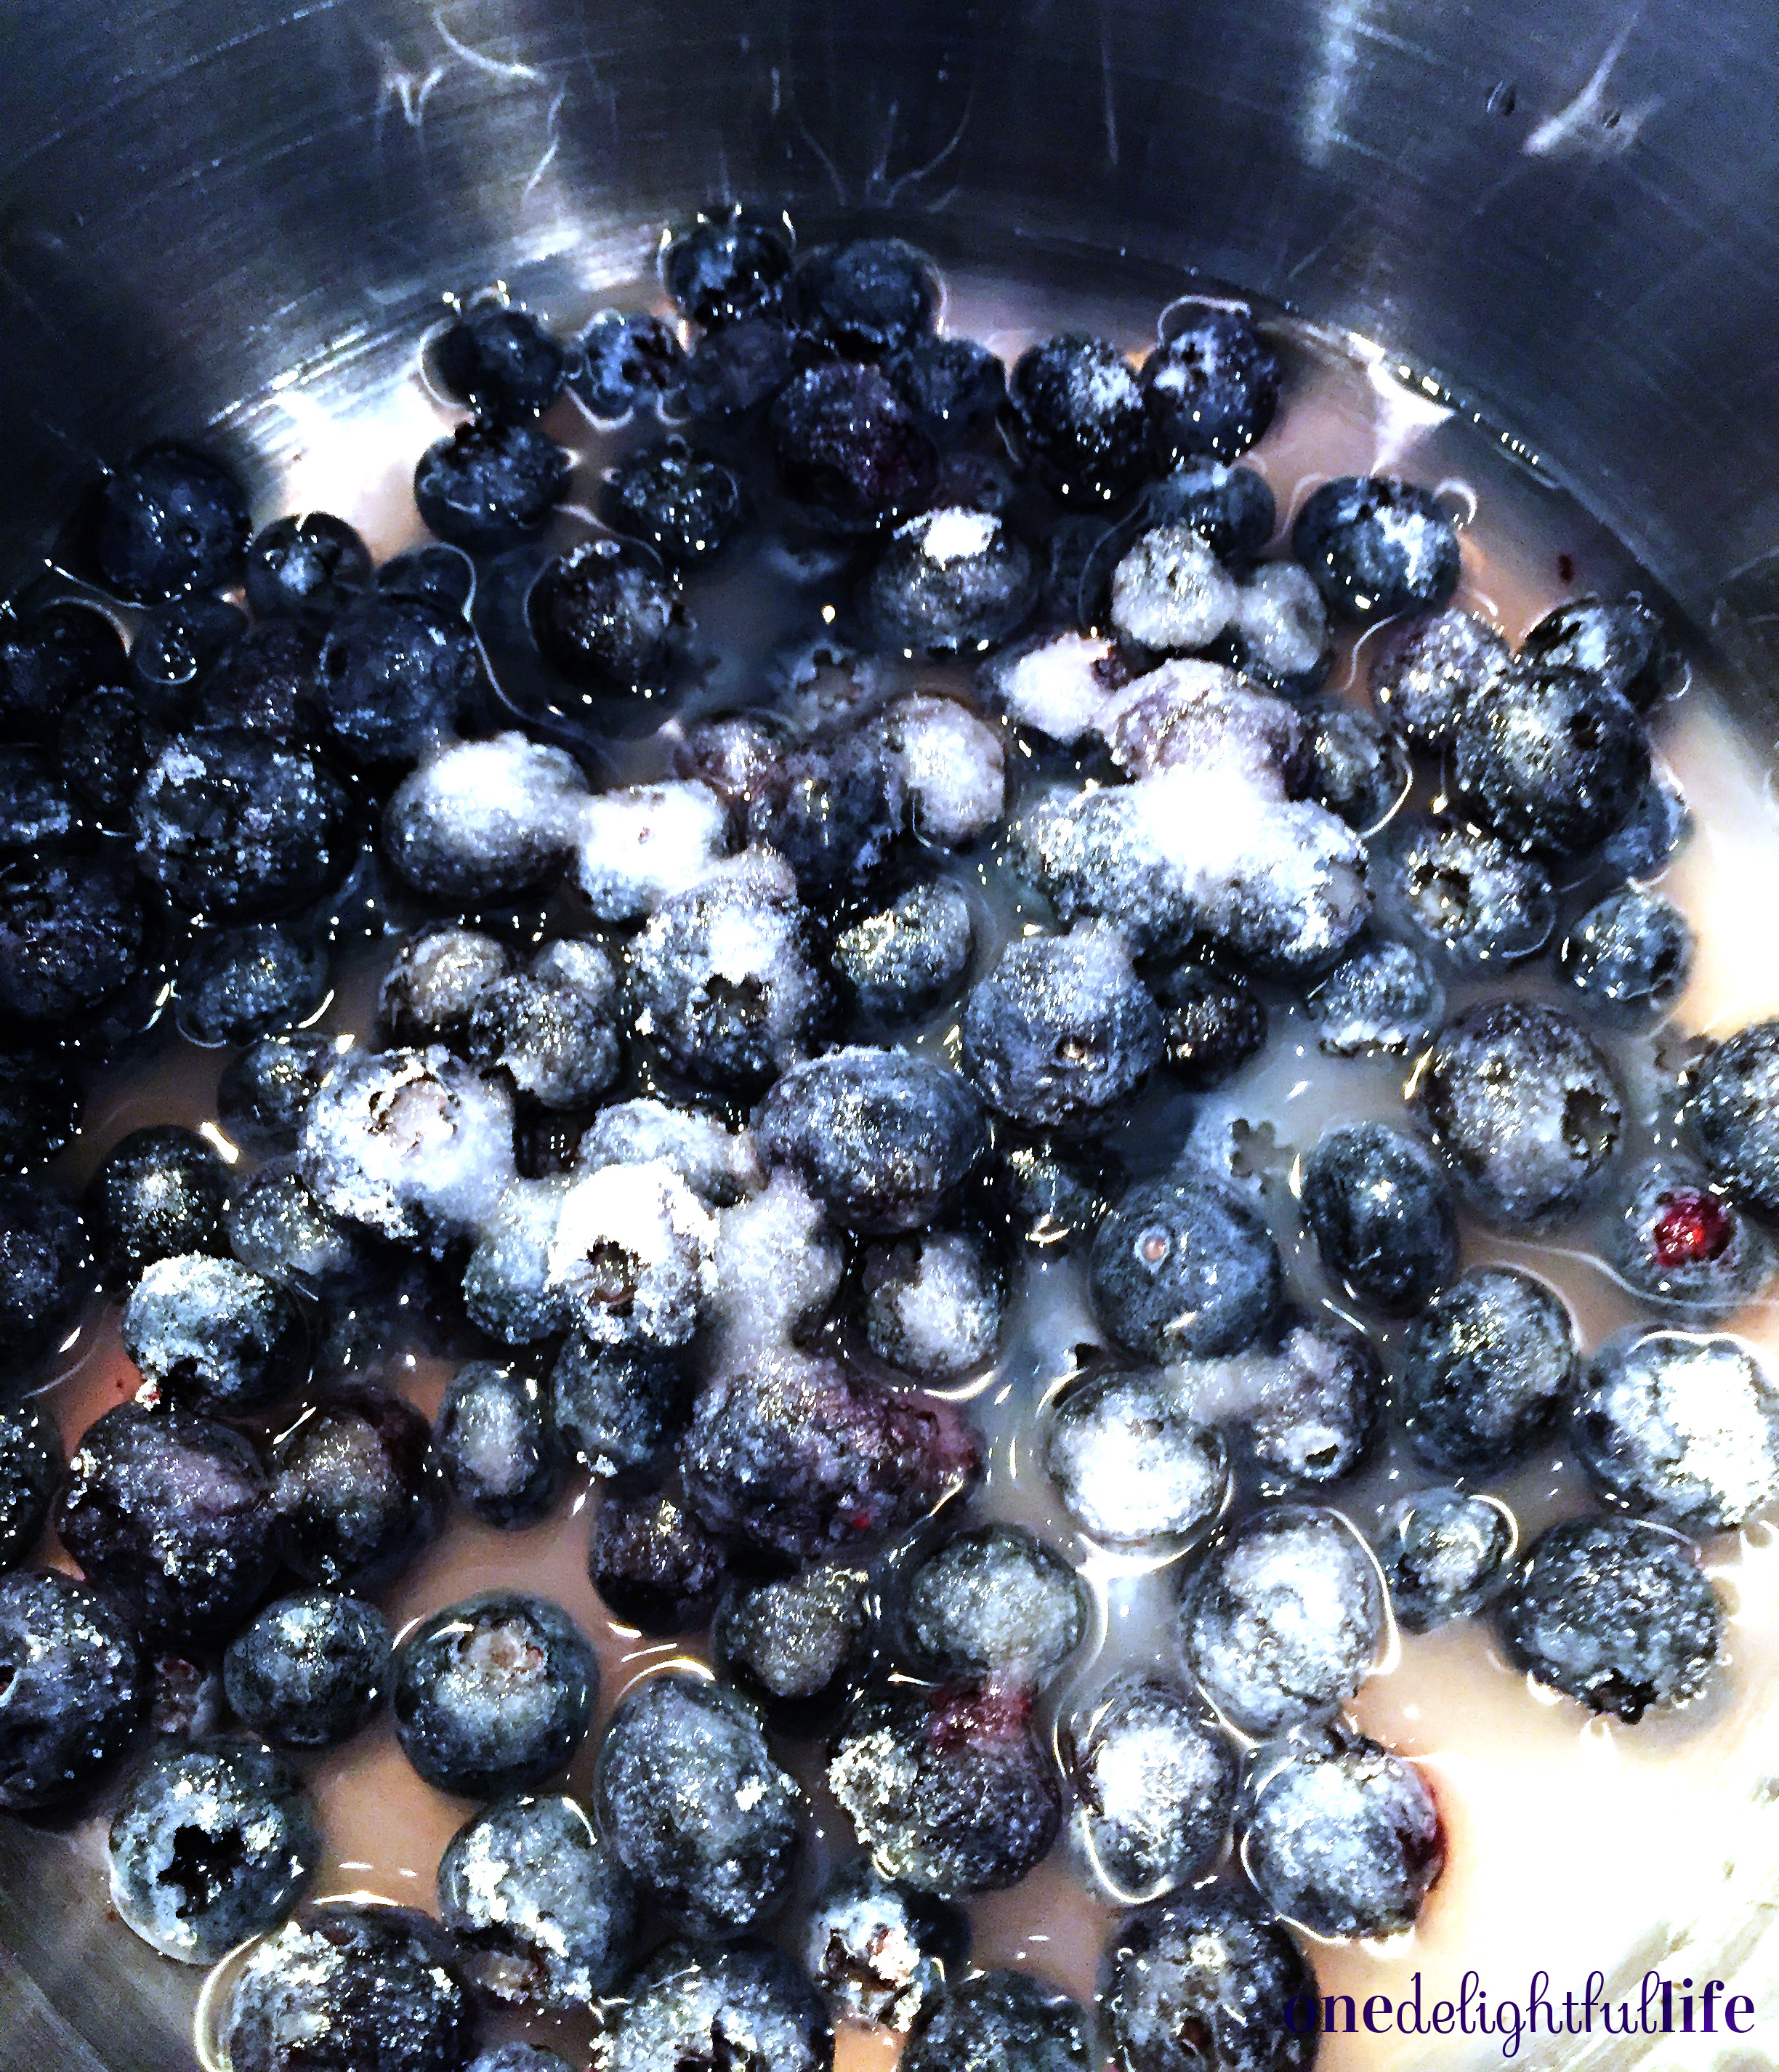 Gently mix the blueberries so they don't mash up. 